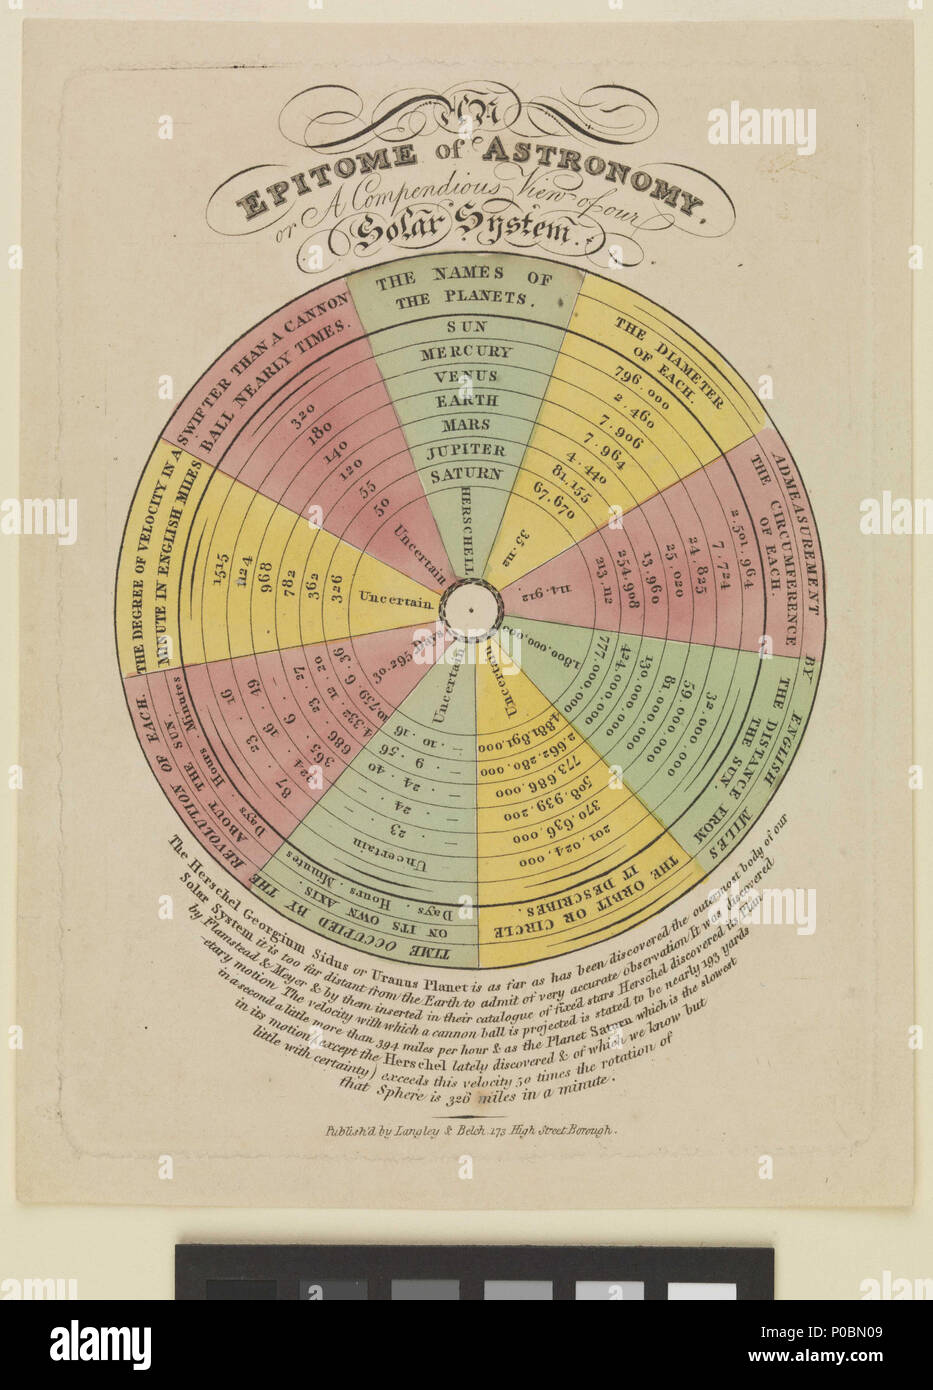 English: An Epitome of Astronomy or a Compendious View of our Solar System  This hand-coloured print presents a circular table of information about the  known planets of the Solar System, particularly